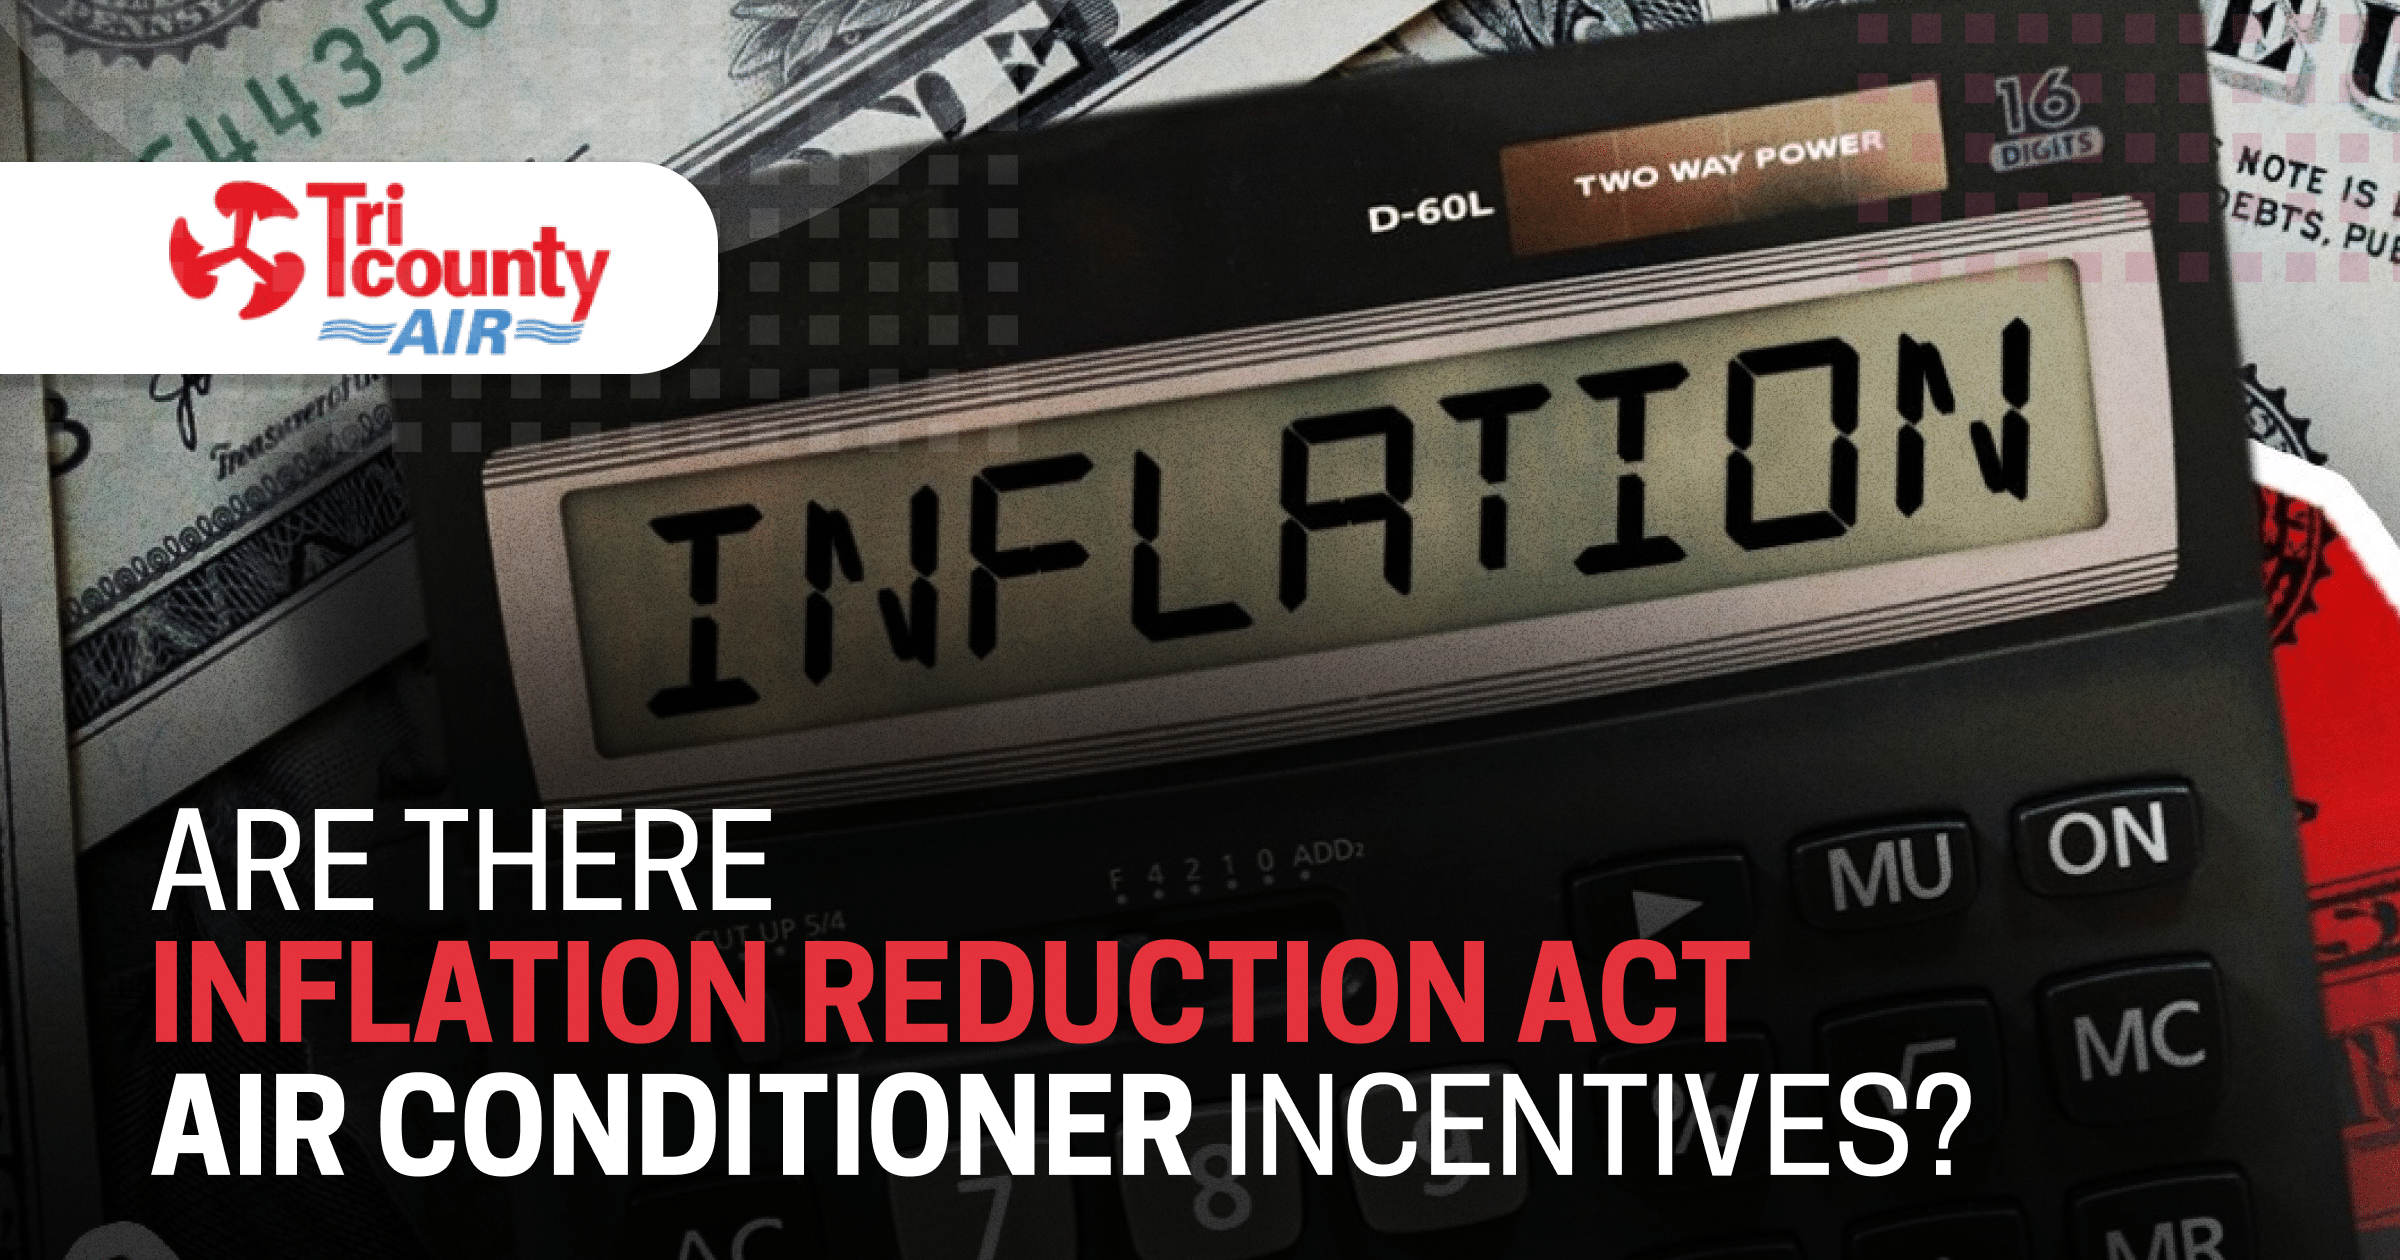 Are There Inflation Reduction Act Air Conditioner Incentives?